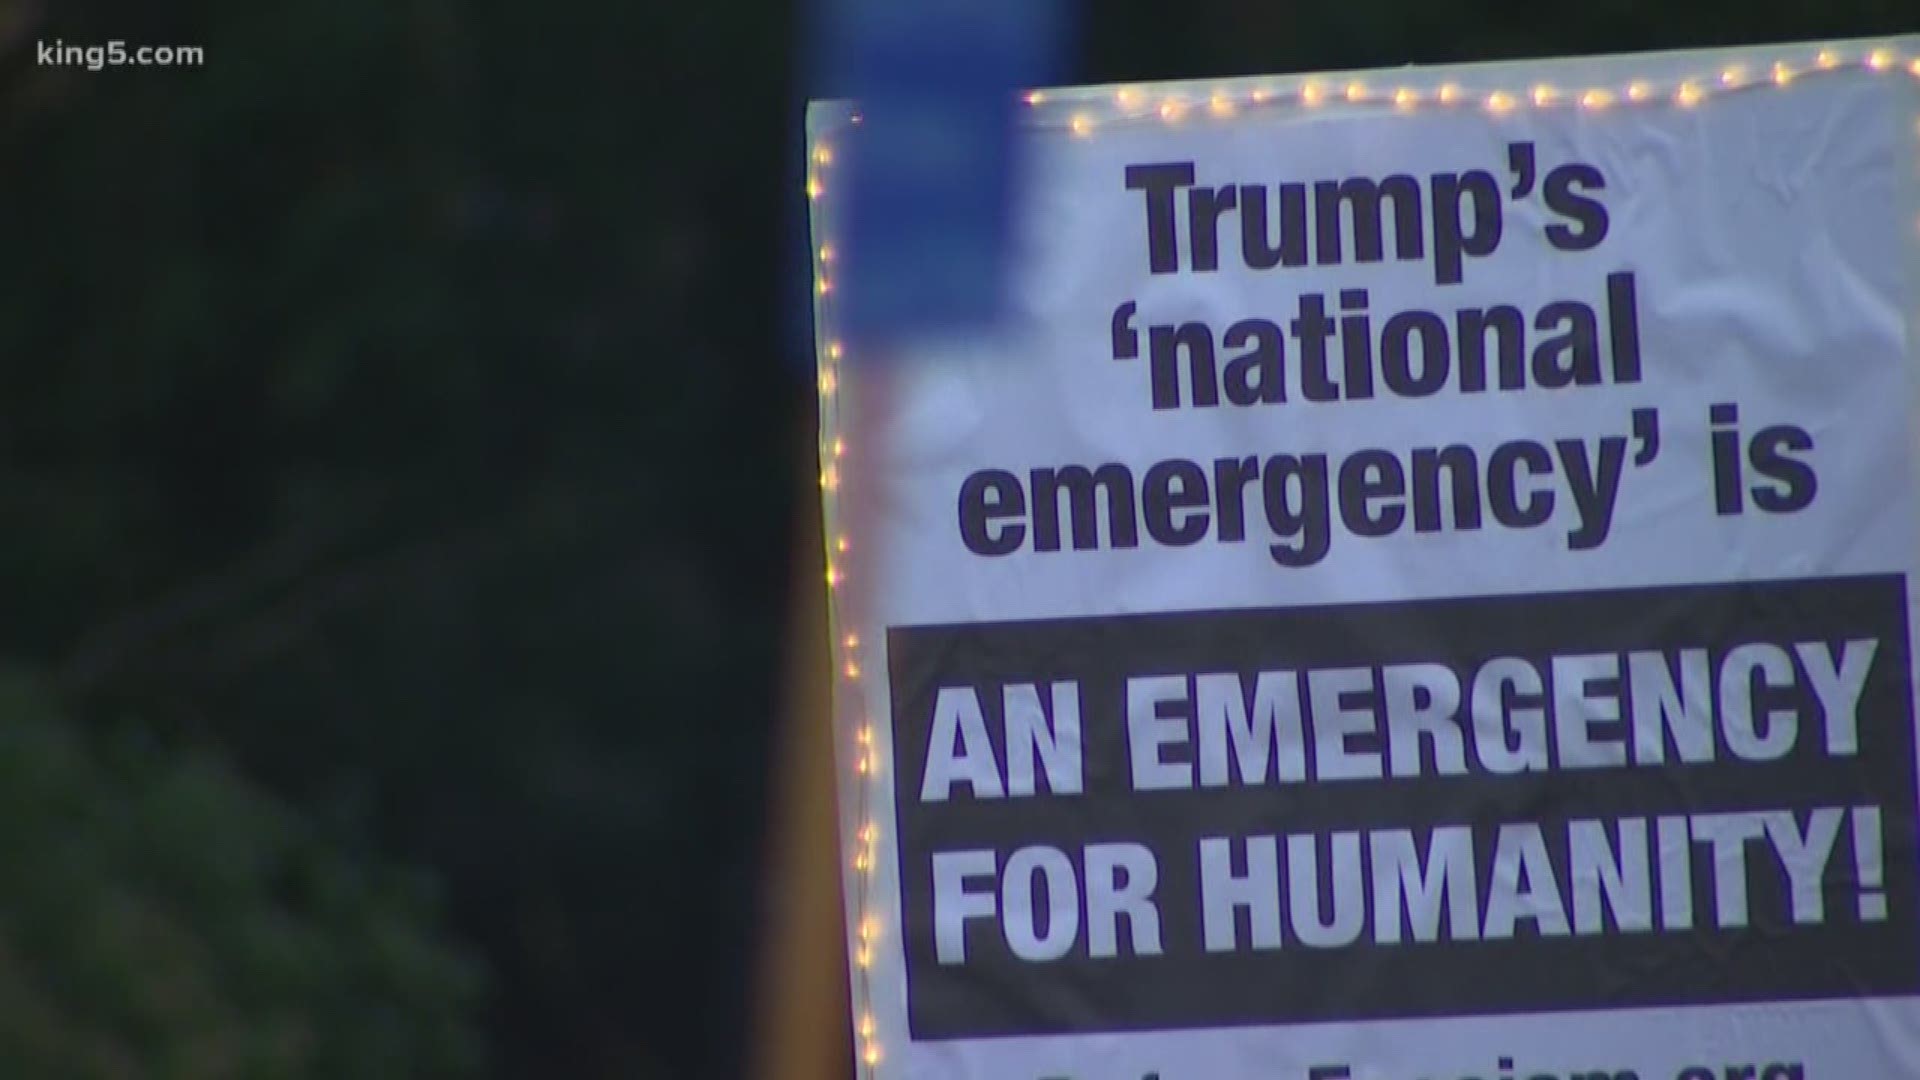 Demonstrations happened across the country in reaction to the President's emergency declaration. KING 5's Natalie Swaby has more from the rally that brought out hundreds in Seattle.